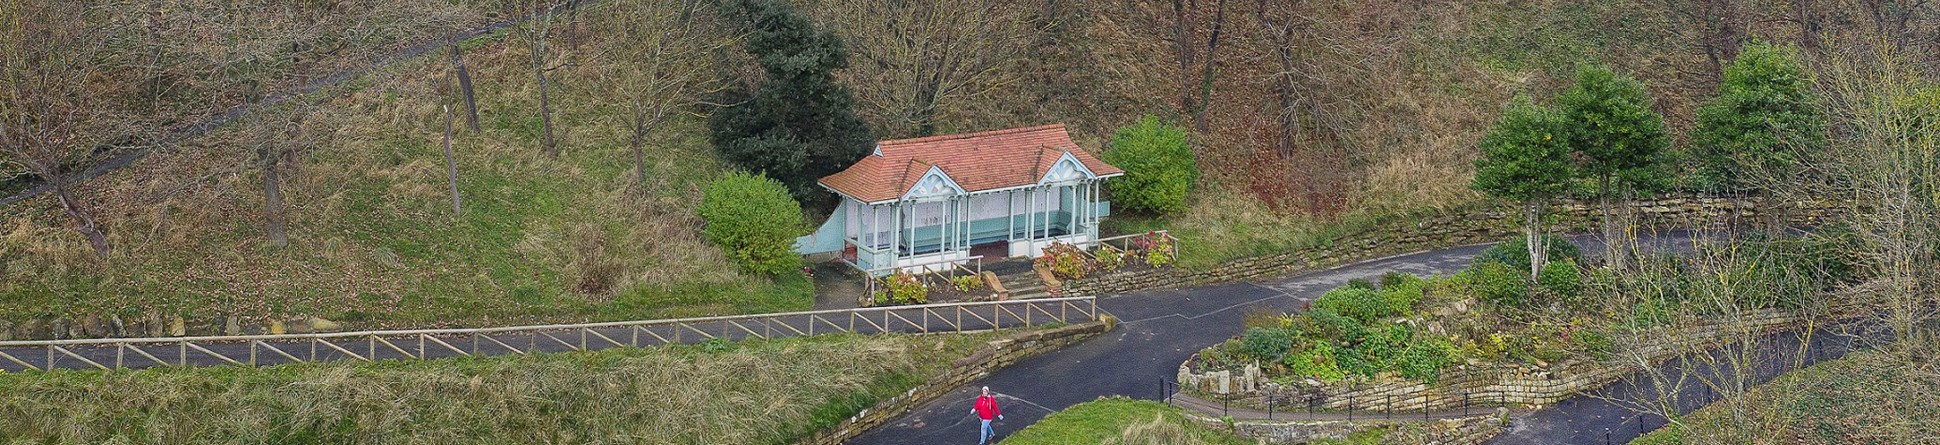 Sheltered Seating, South Cliff Gardens, Scarborough.